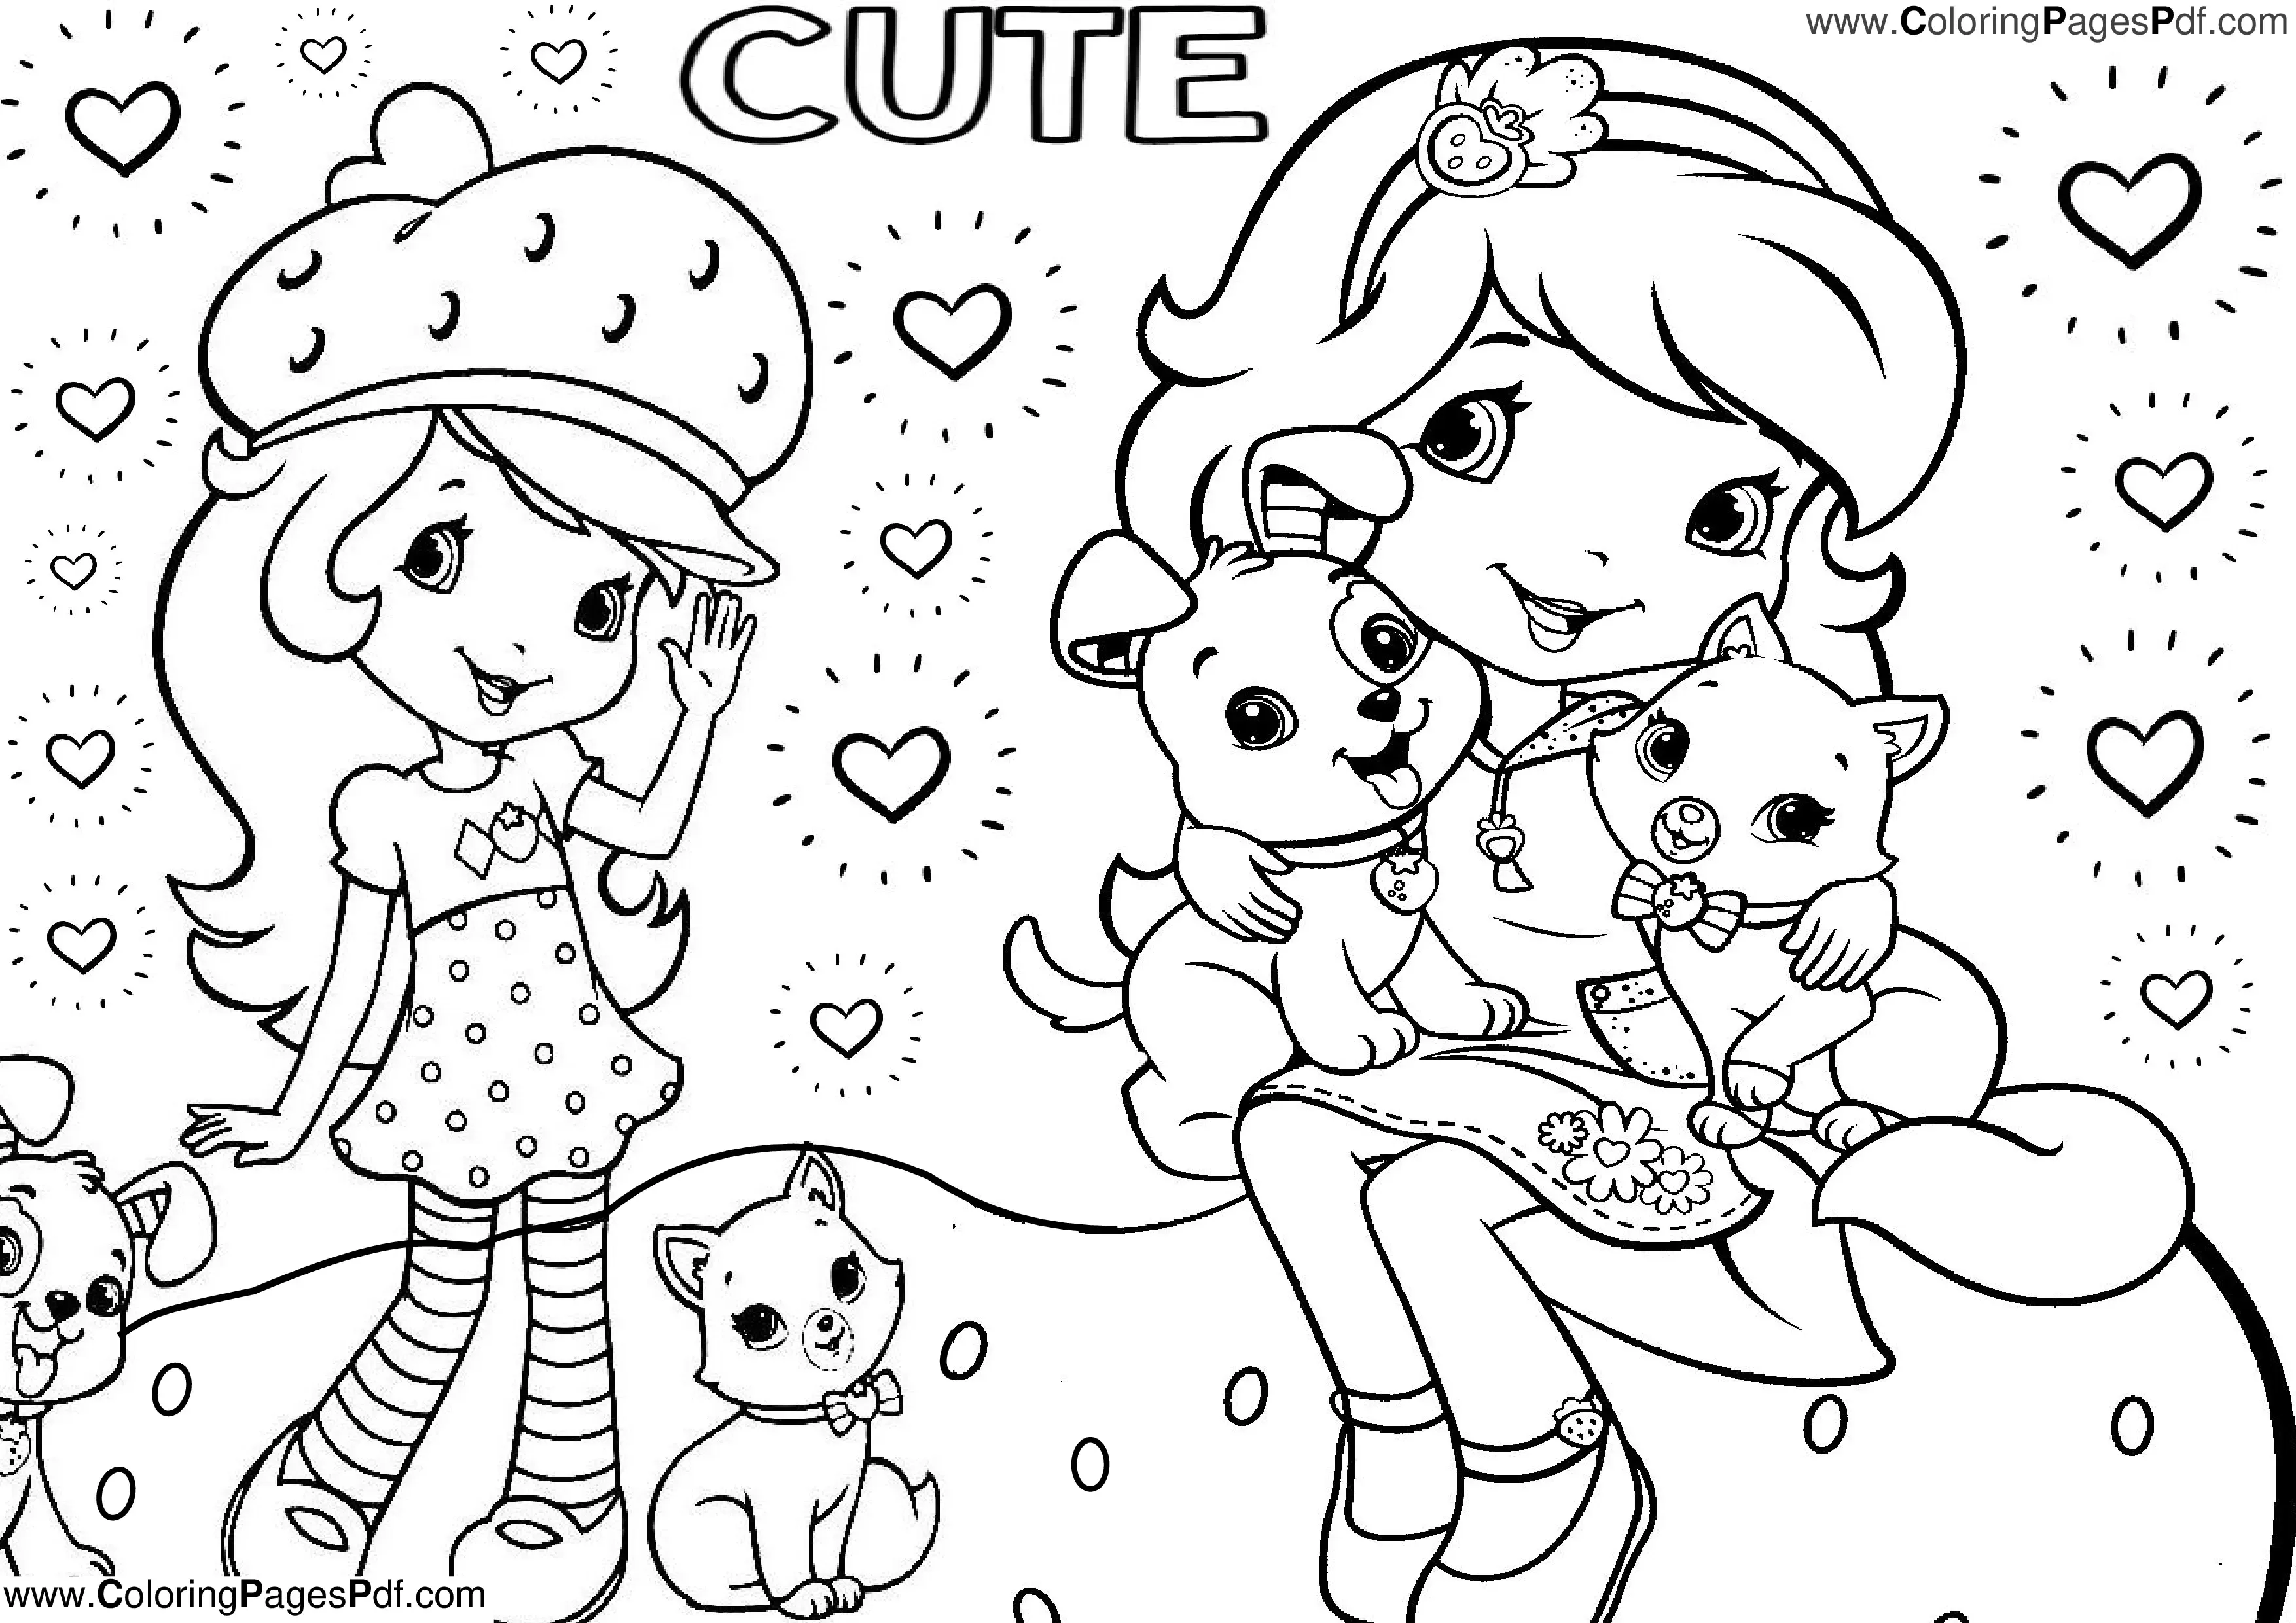 Strawberry shortcake coloring pages for girls